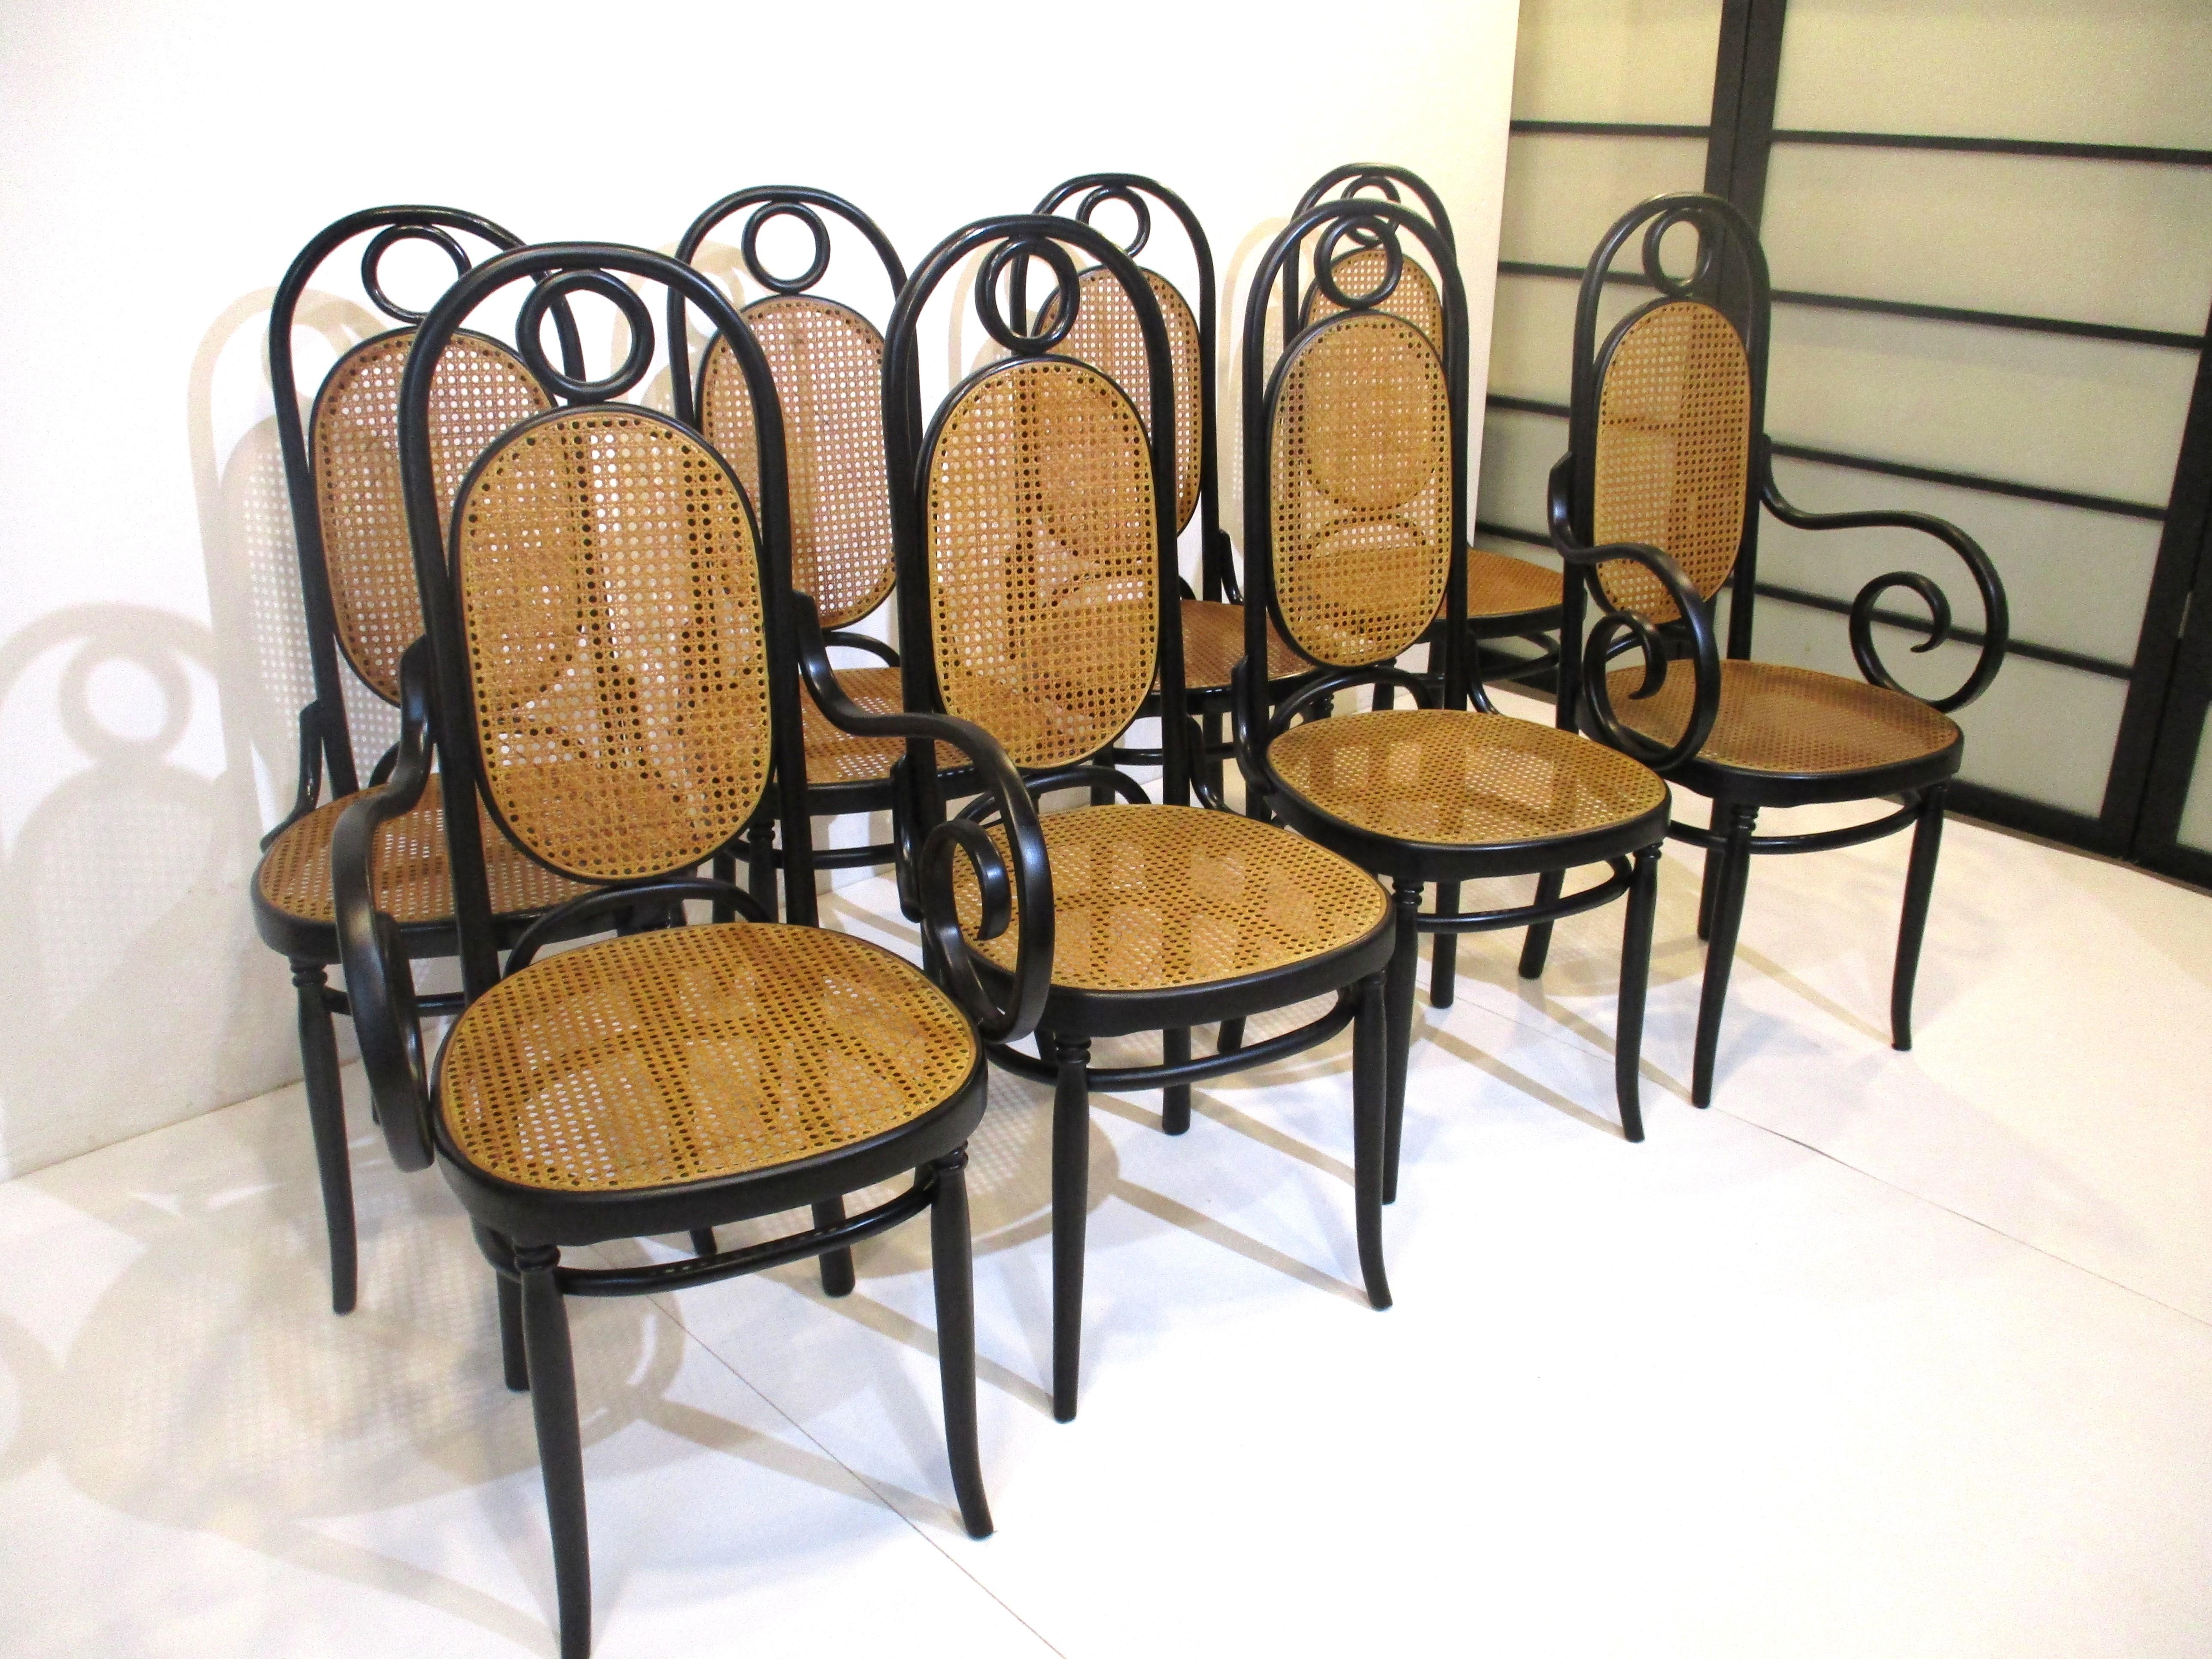 A set of eight high back sculptural satin black bentwood dining chairs with woven back and bottom cane seats . The set contains two arm or head chairs and six side chairs manufactured by the Thonet chair company made in Italy . A classic styled